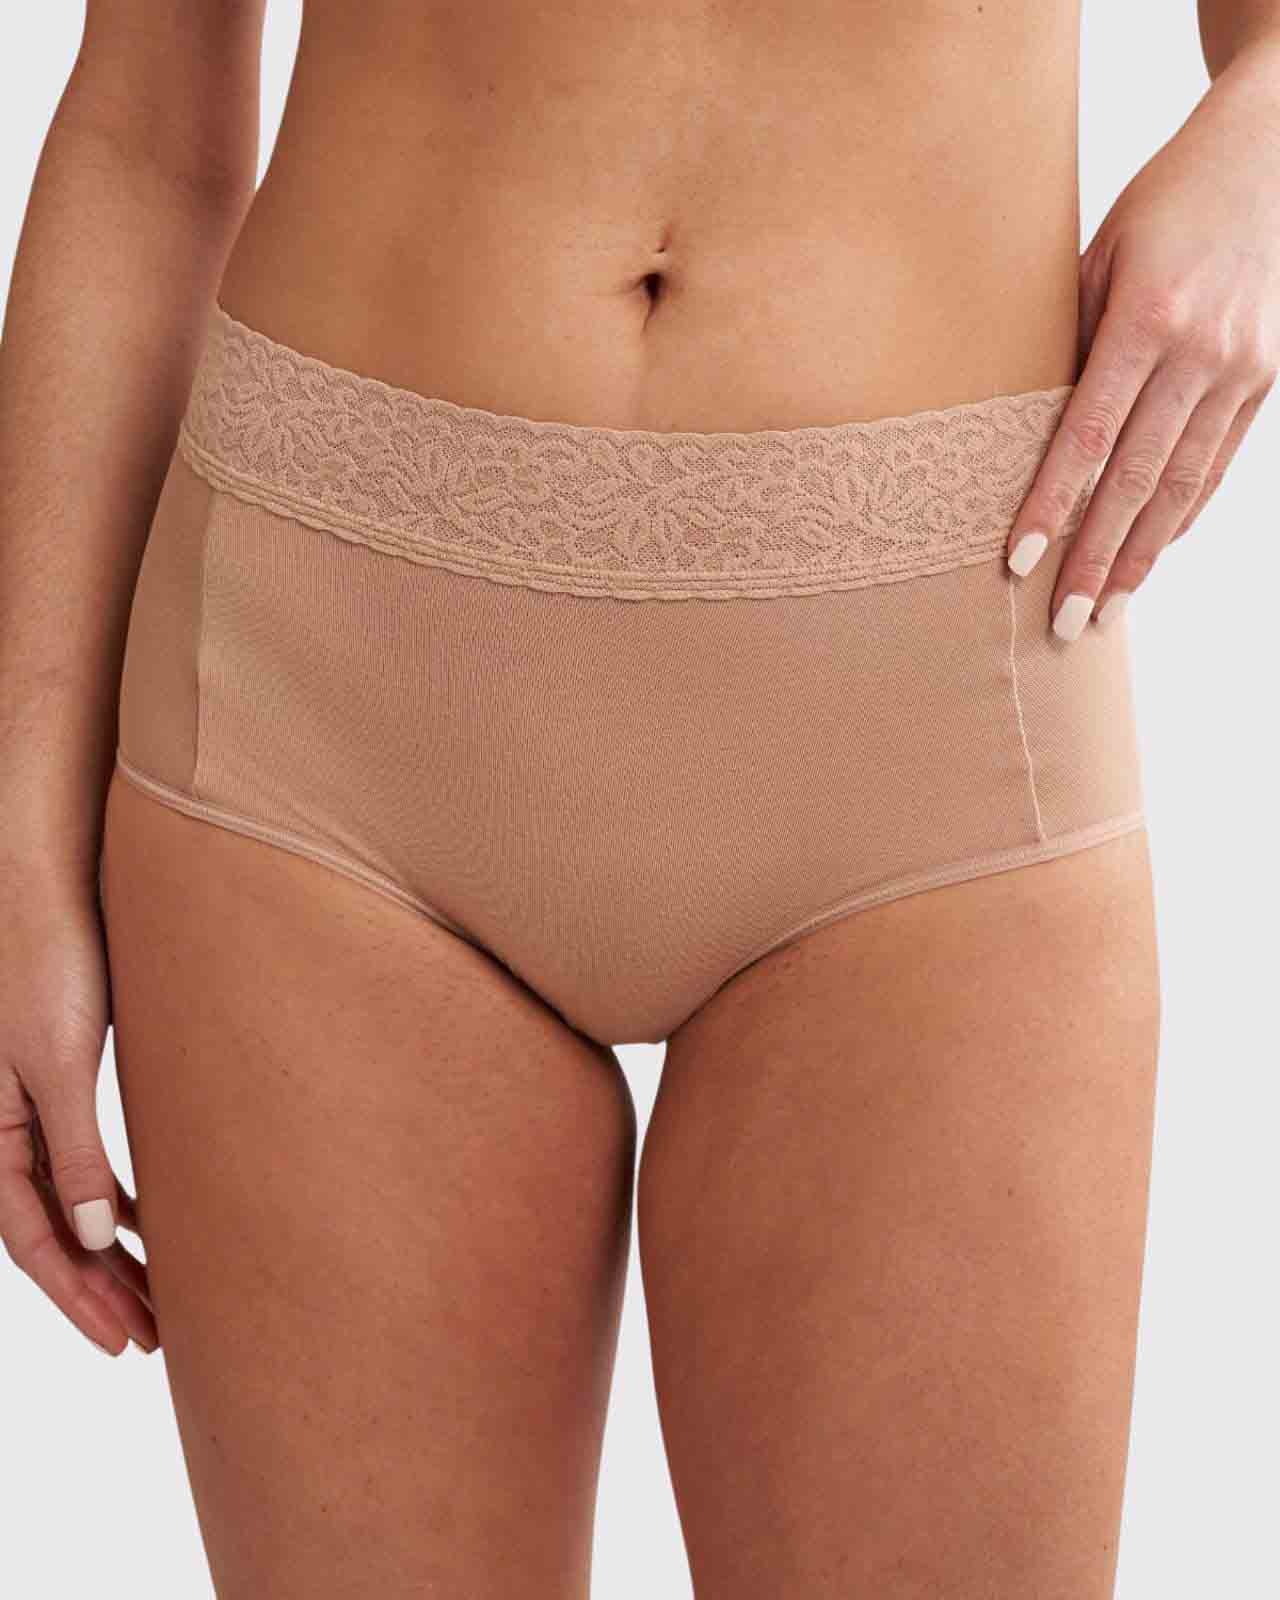 High-waisted Panties in Lace, Cotton & Mesh